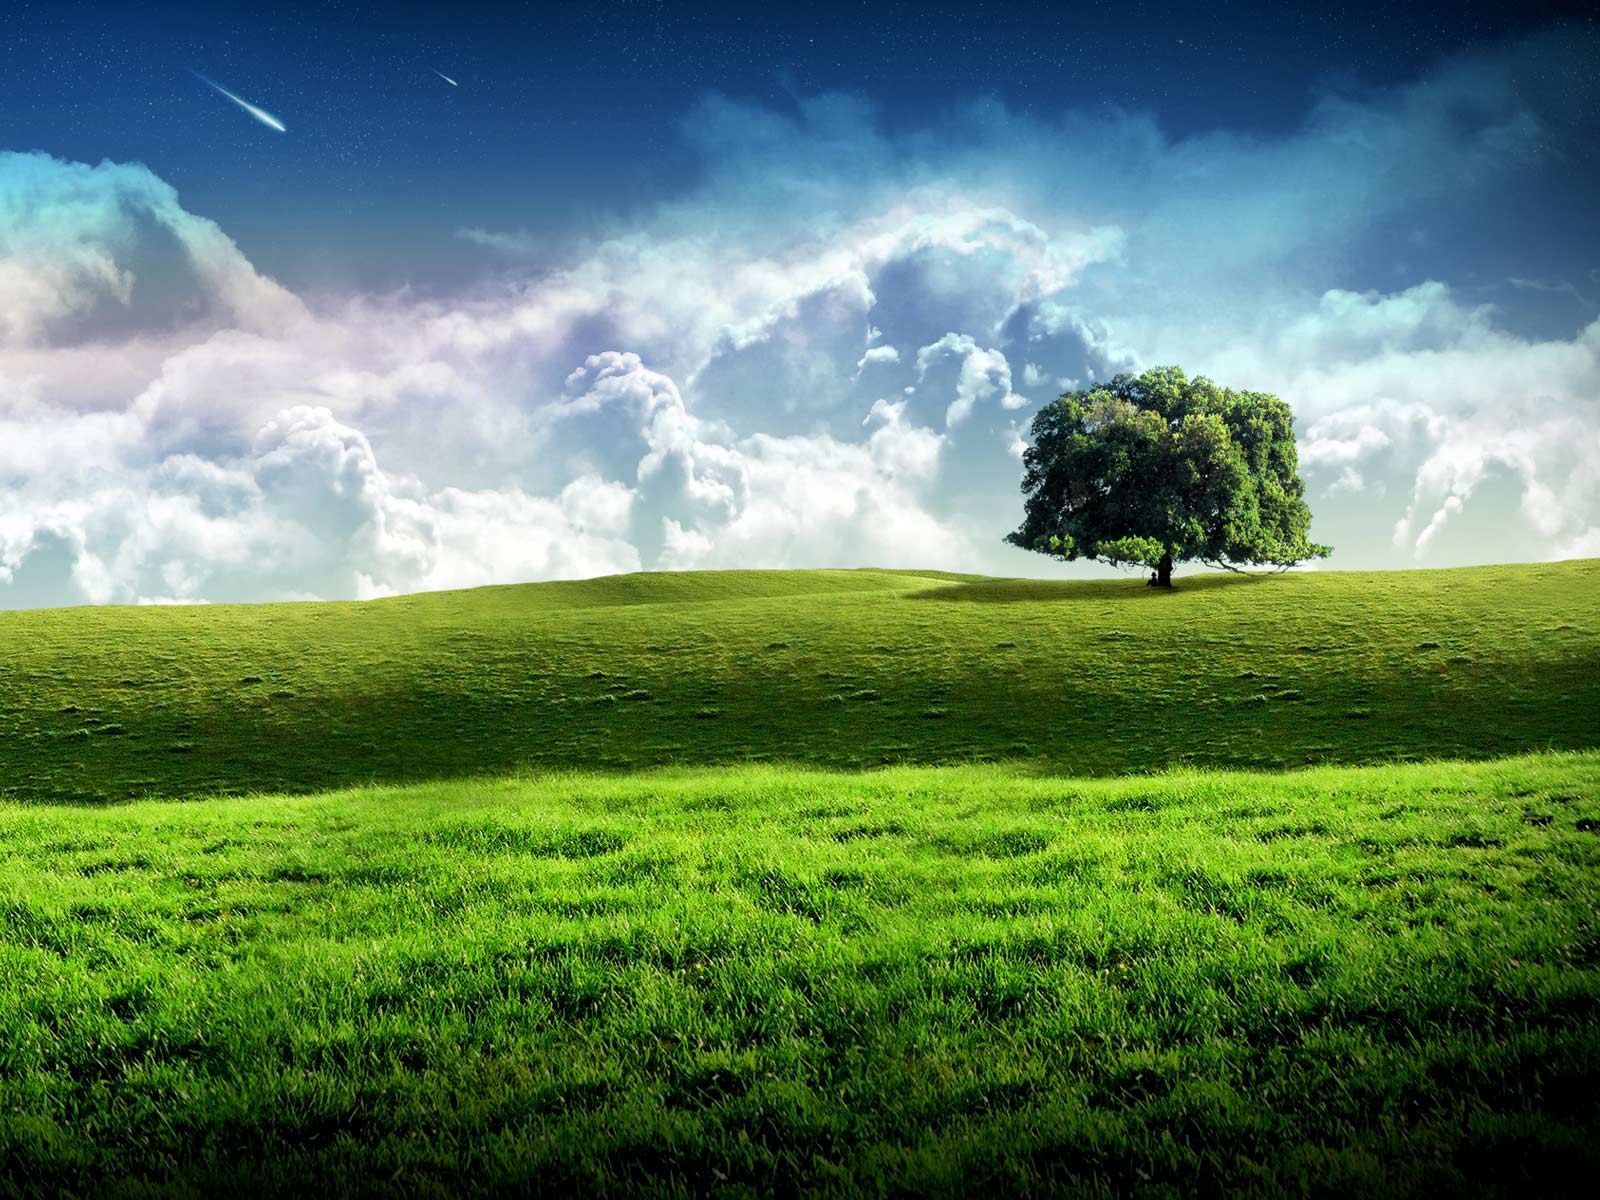 New Bliss Tree Green Landscape Scenery Wallpaper Image At